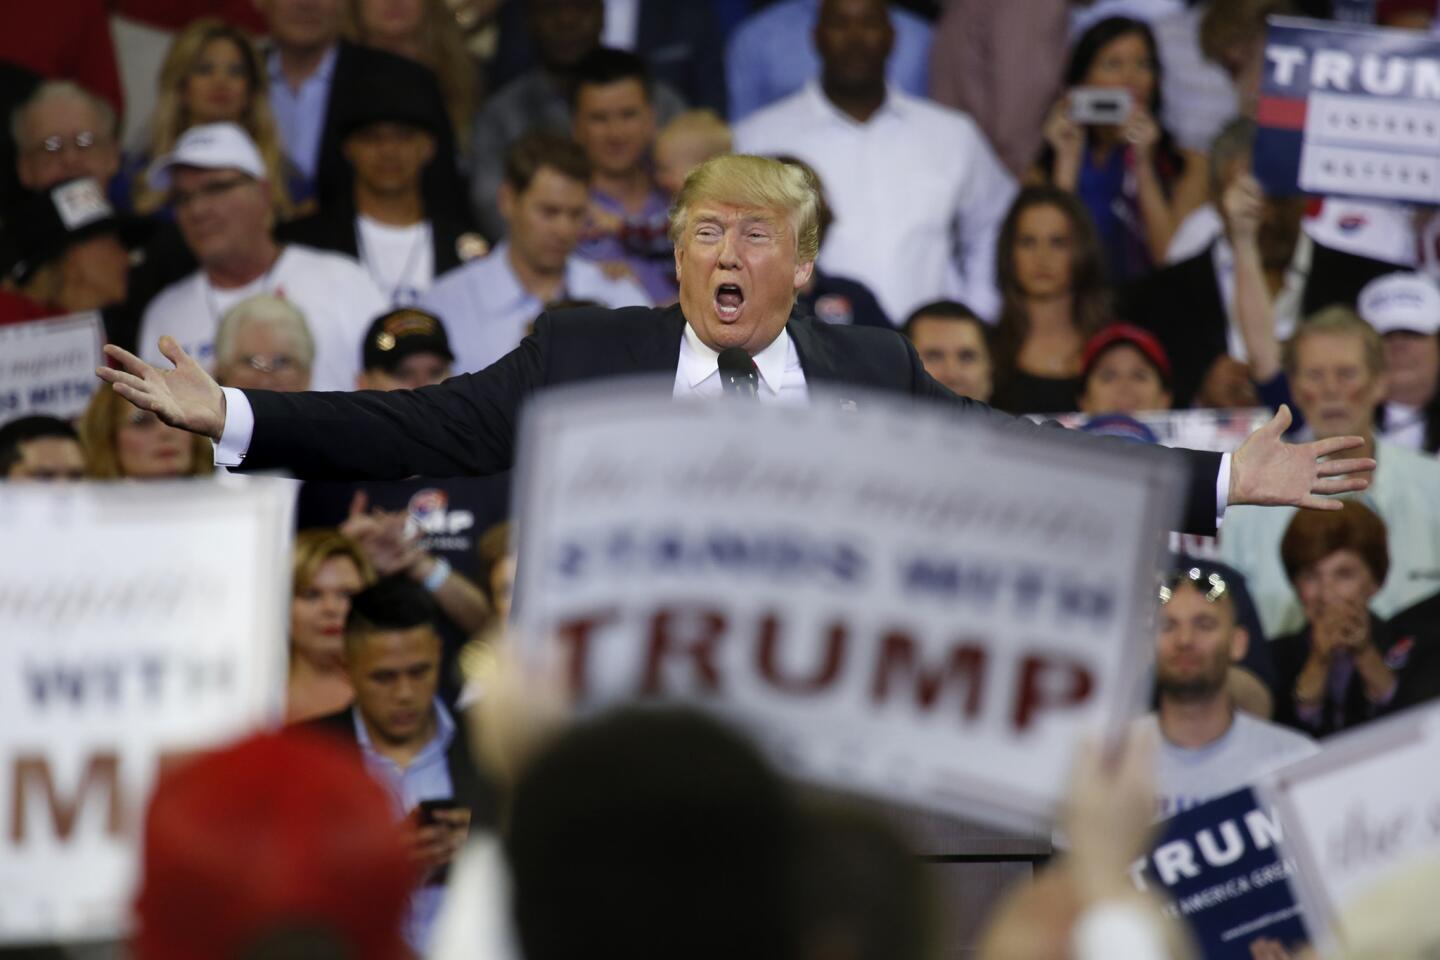 More than 9,000 people attended a rally at the CFE Arena in Orlando, Fla., for Republican presidential candidate Donald Trump, with many more turned away at the gates.